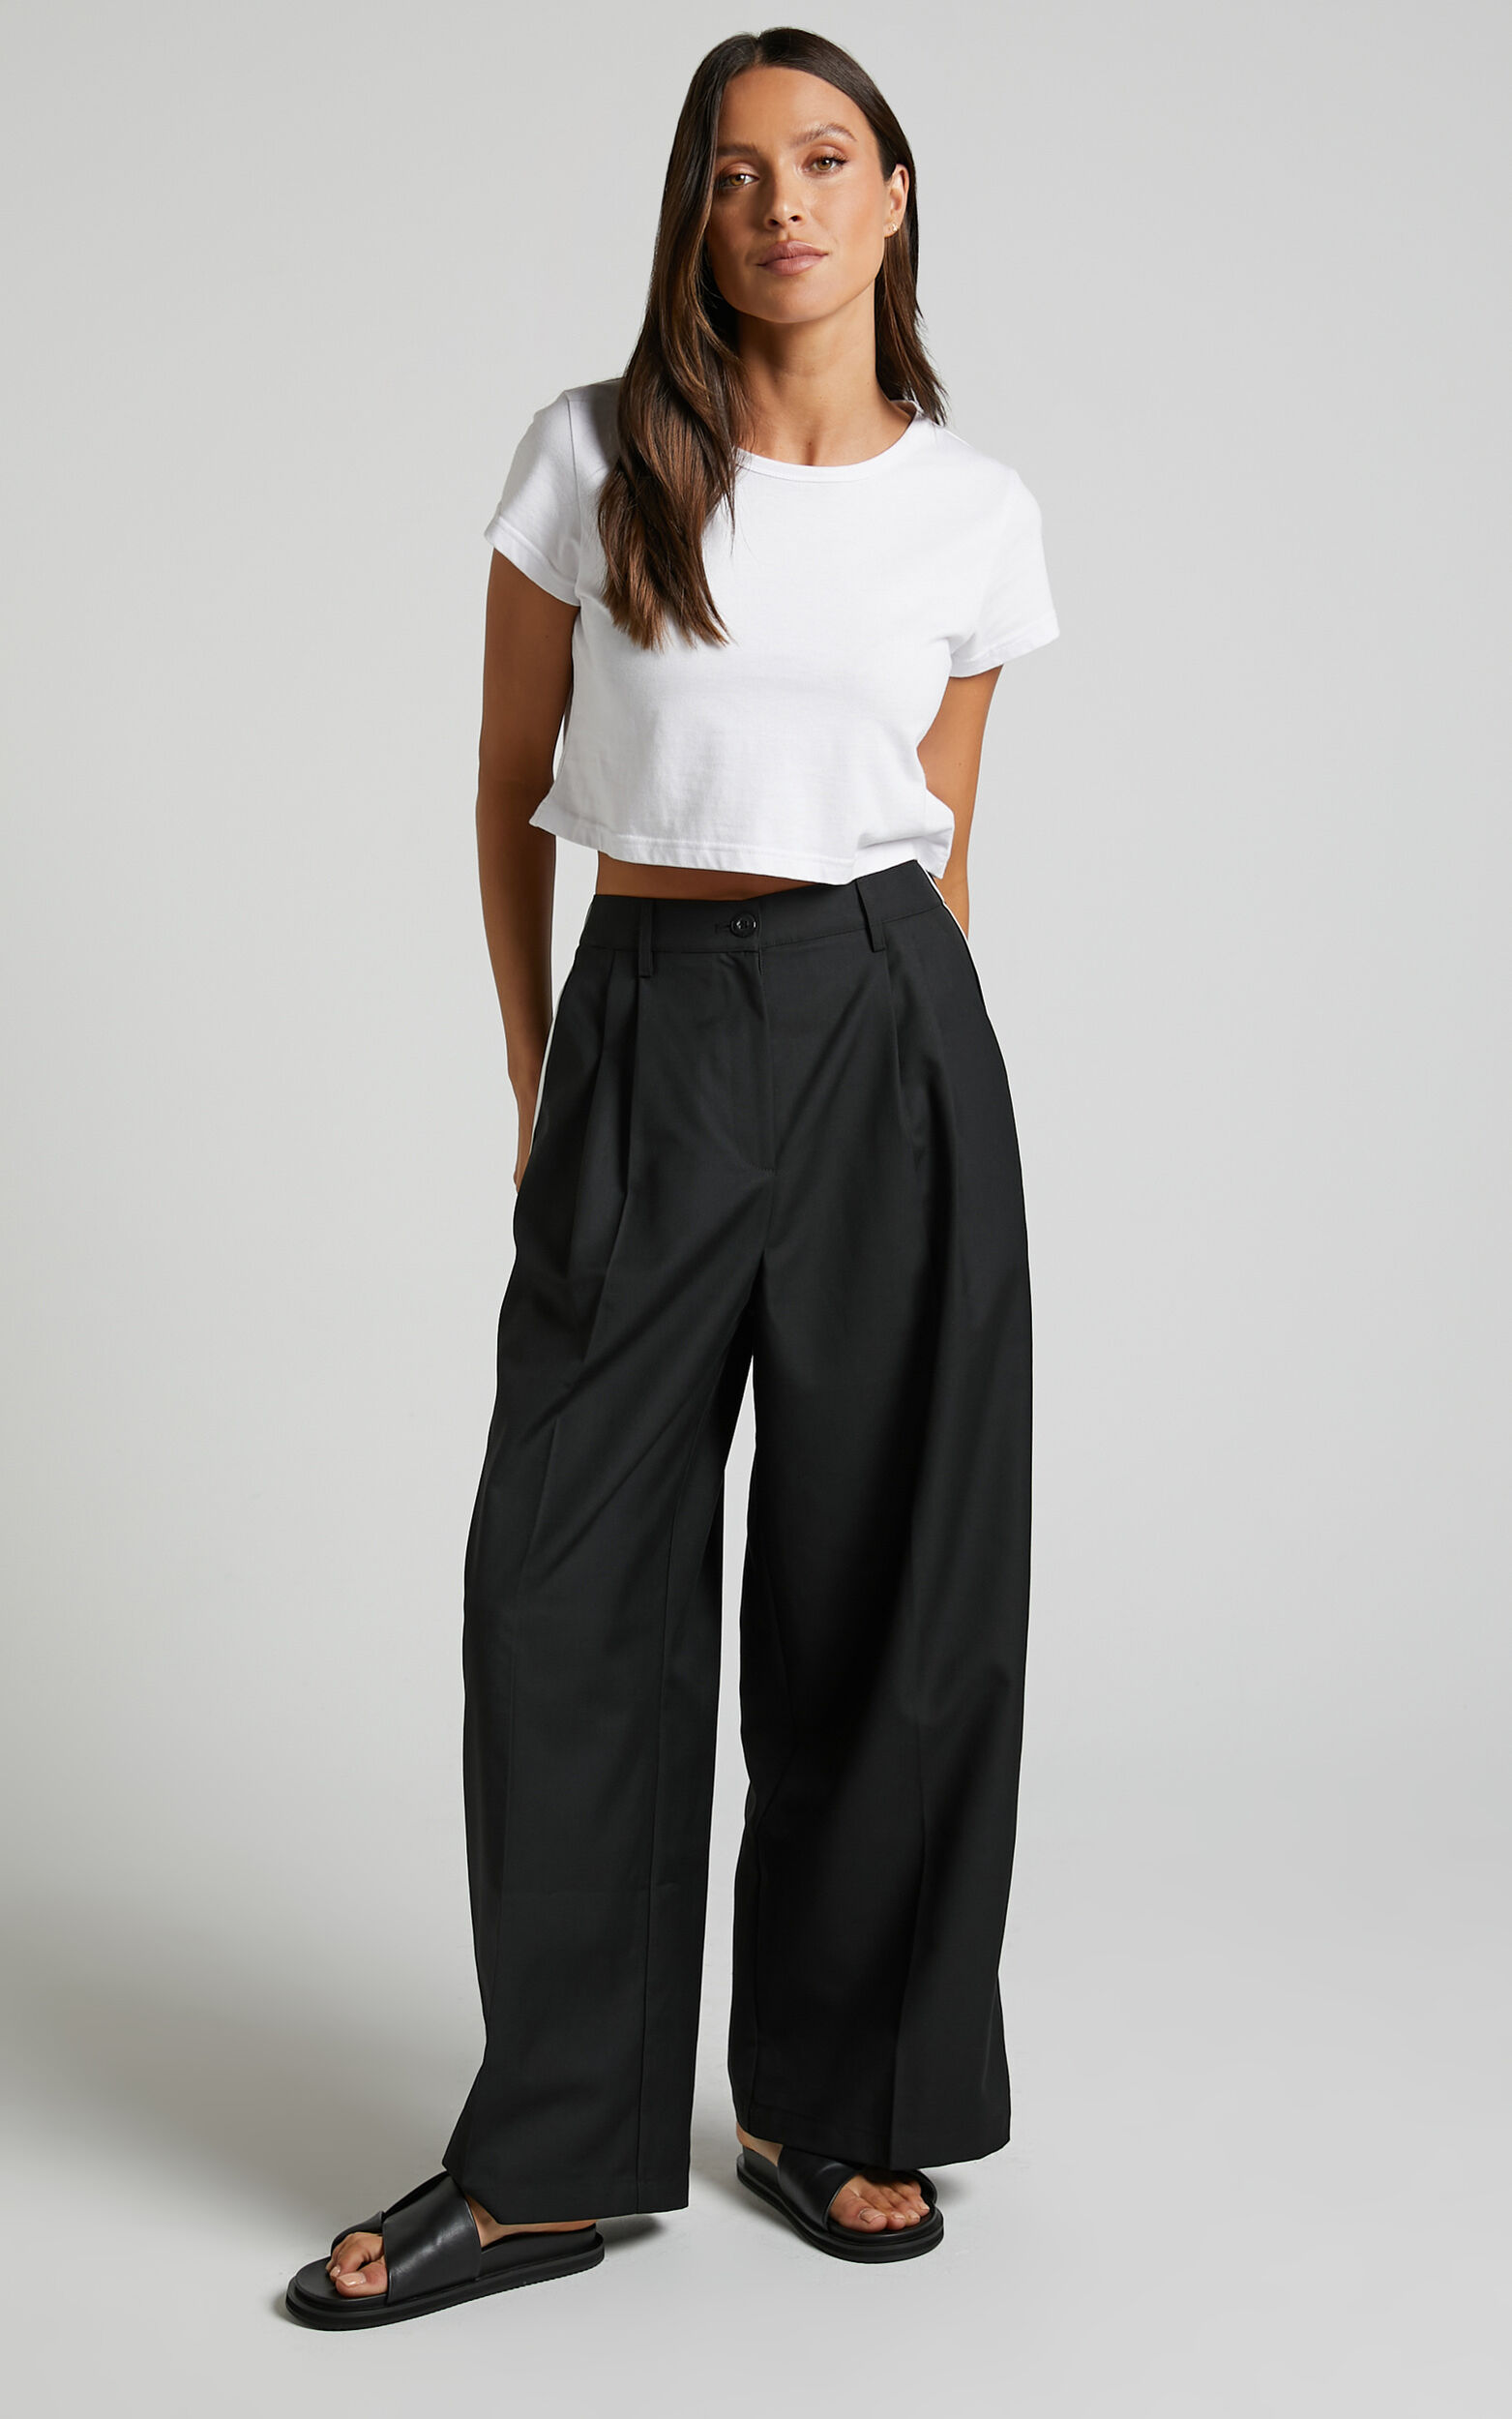 LIONESS - OFF DUTY PANT in ONYX - 06, BLK1